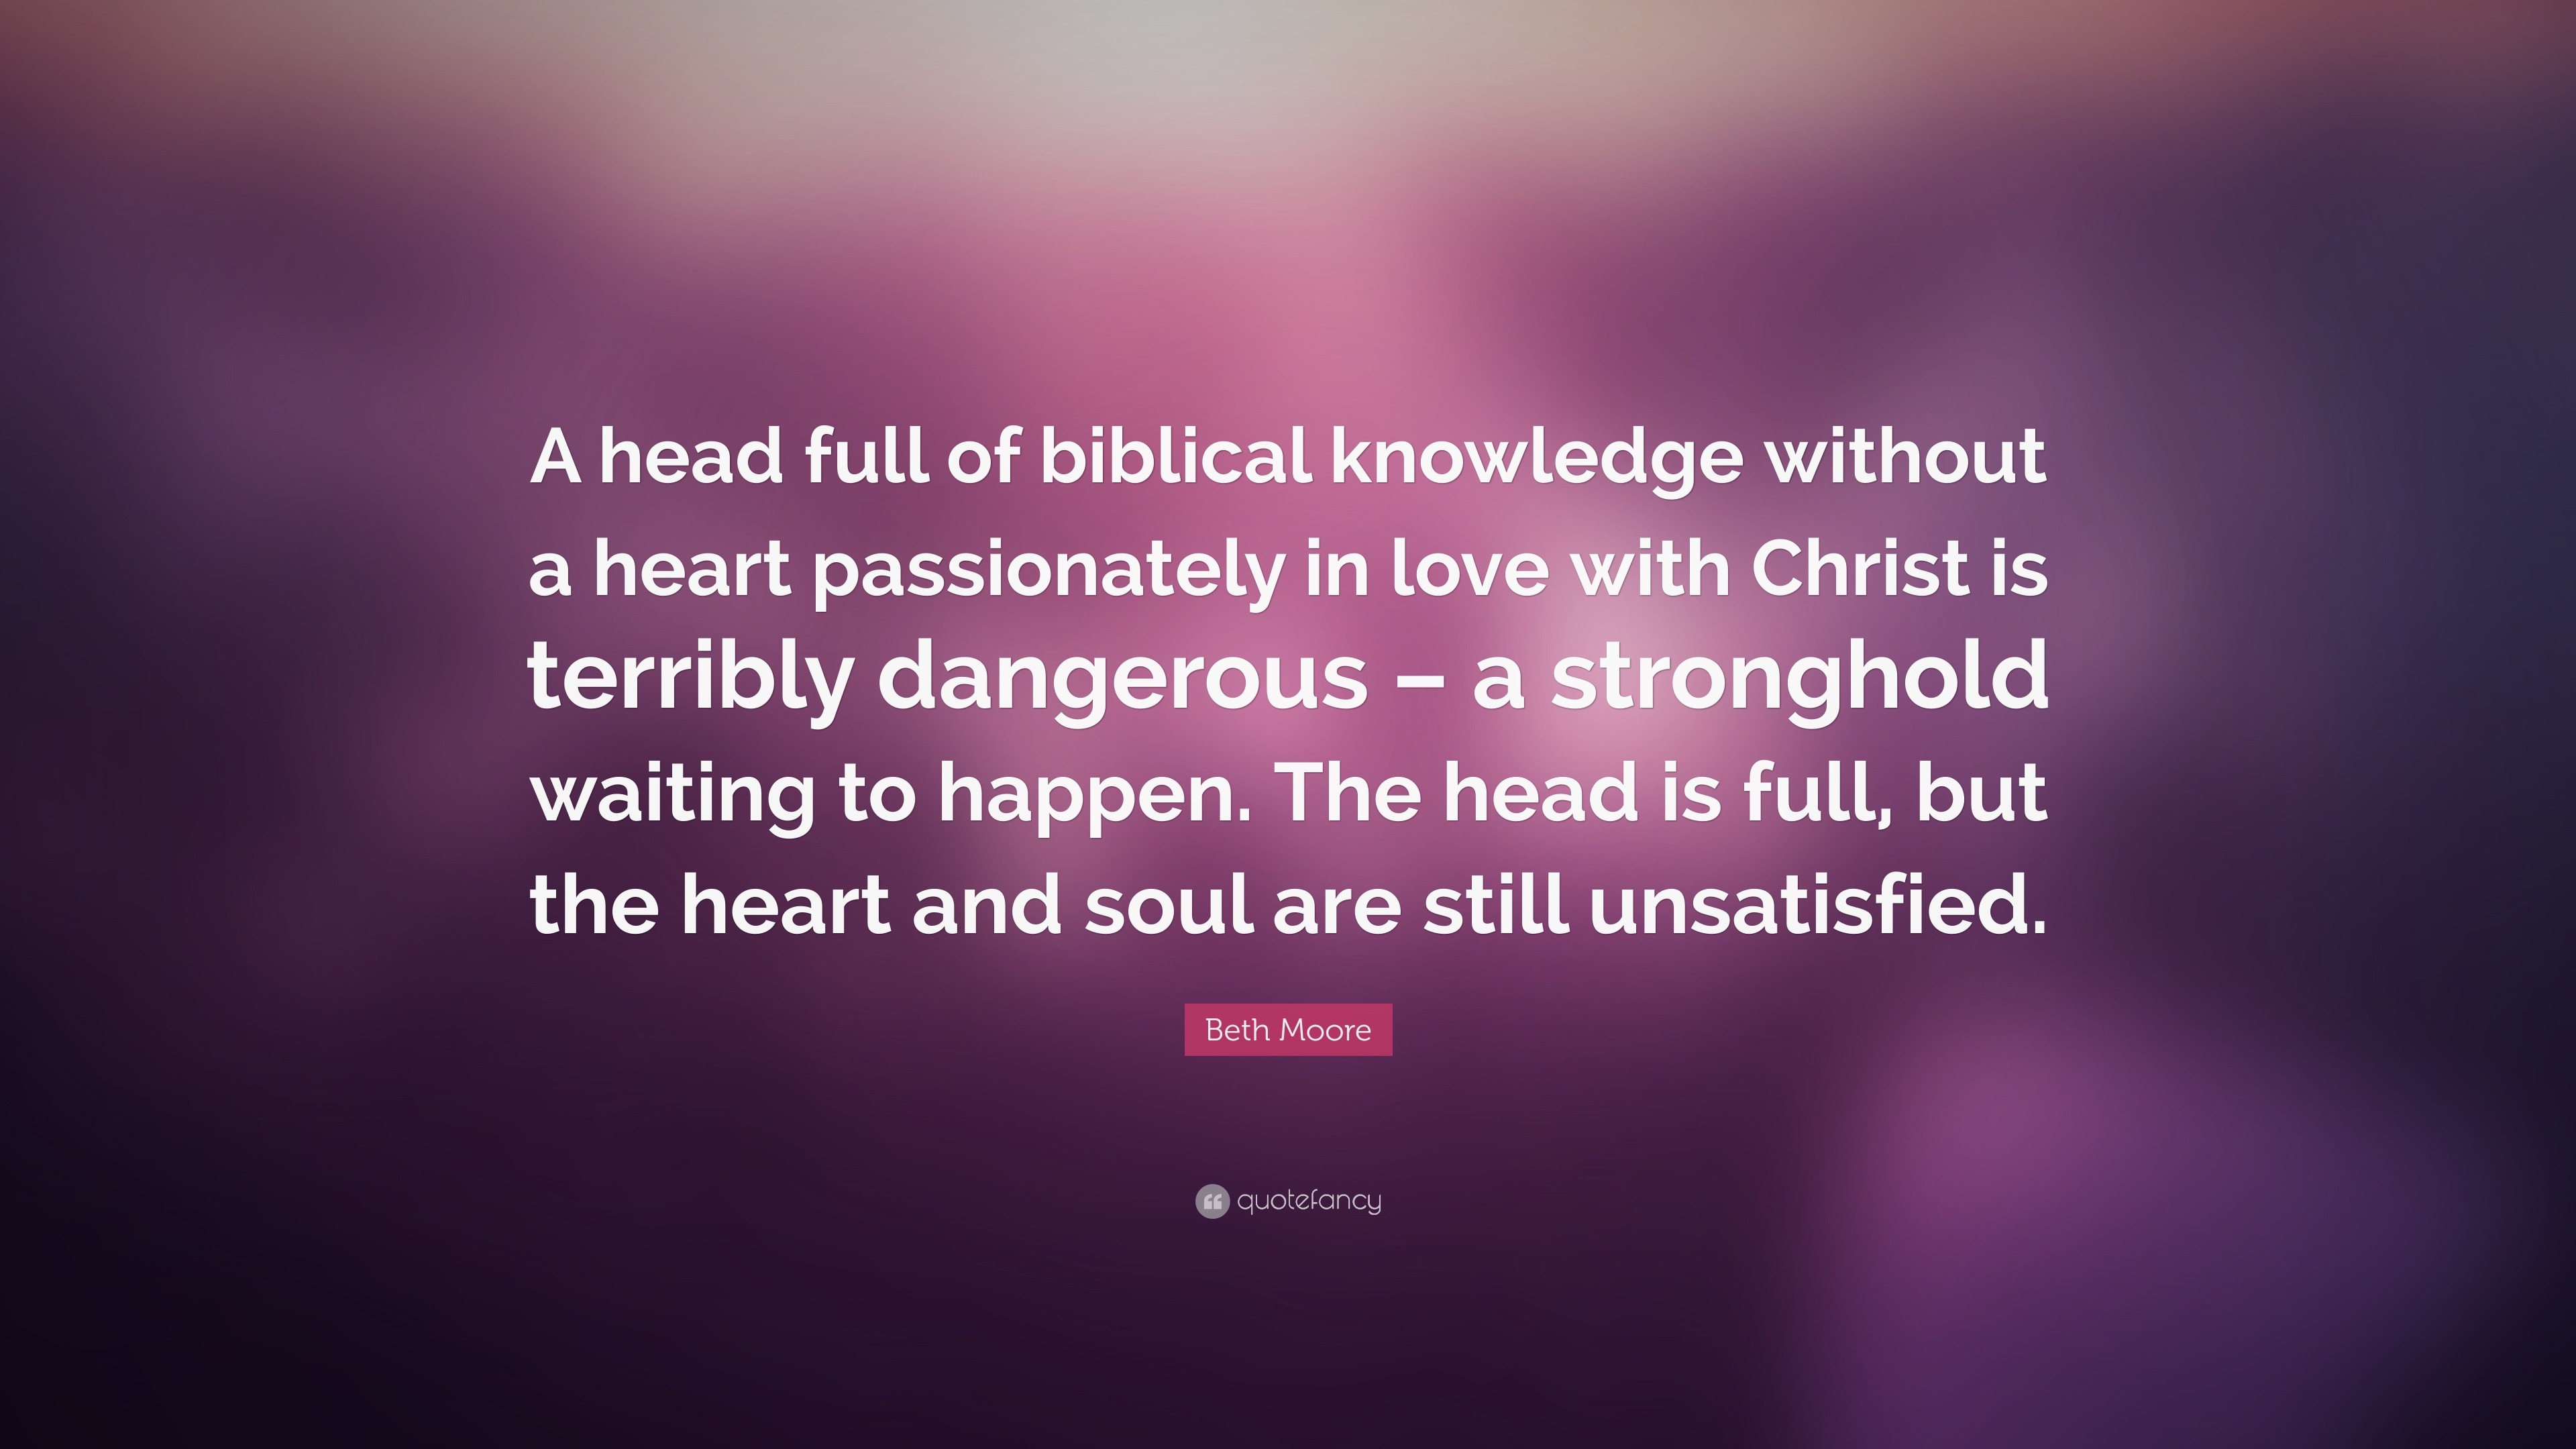 Beth Moore Quote “A head full of biblical knowledge without a heart passionately in